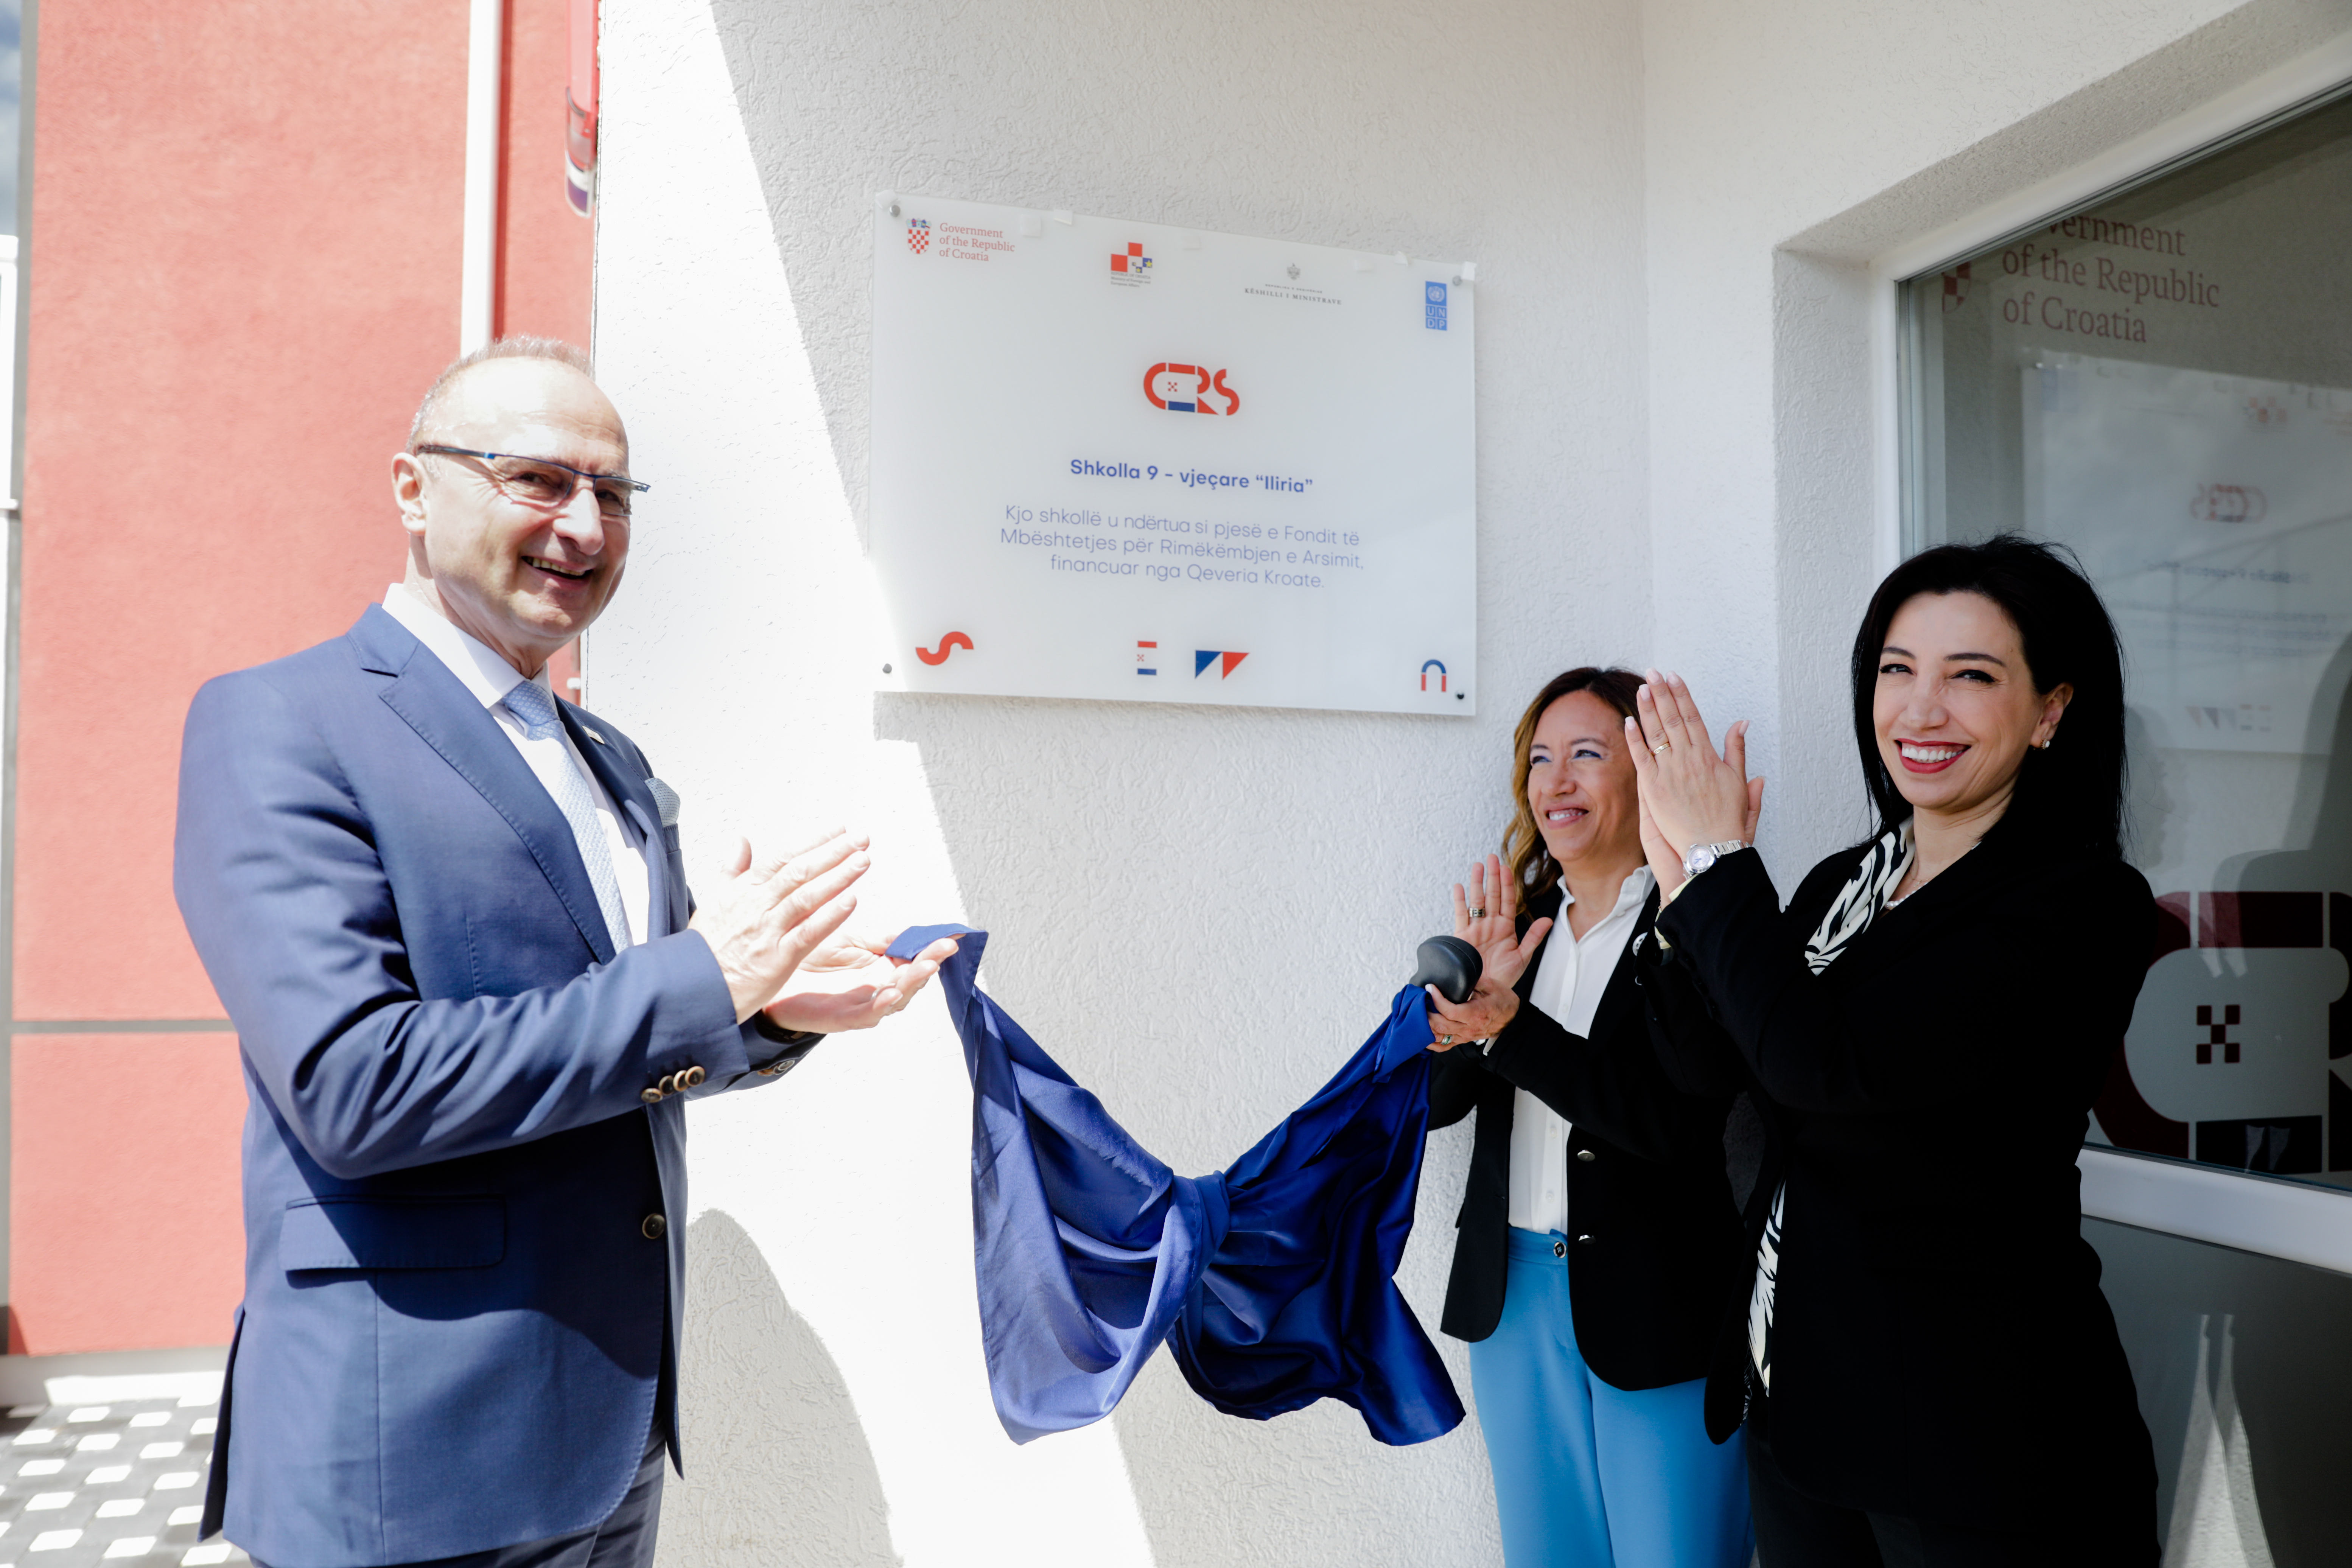 The Minister of Foreign and European Affairs of Croatia Visits "Iliria" School and Kindergarten in Fushë-Kruja, Fully Reconstructed with Funding from Croatia